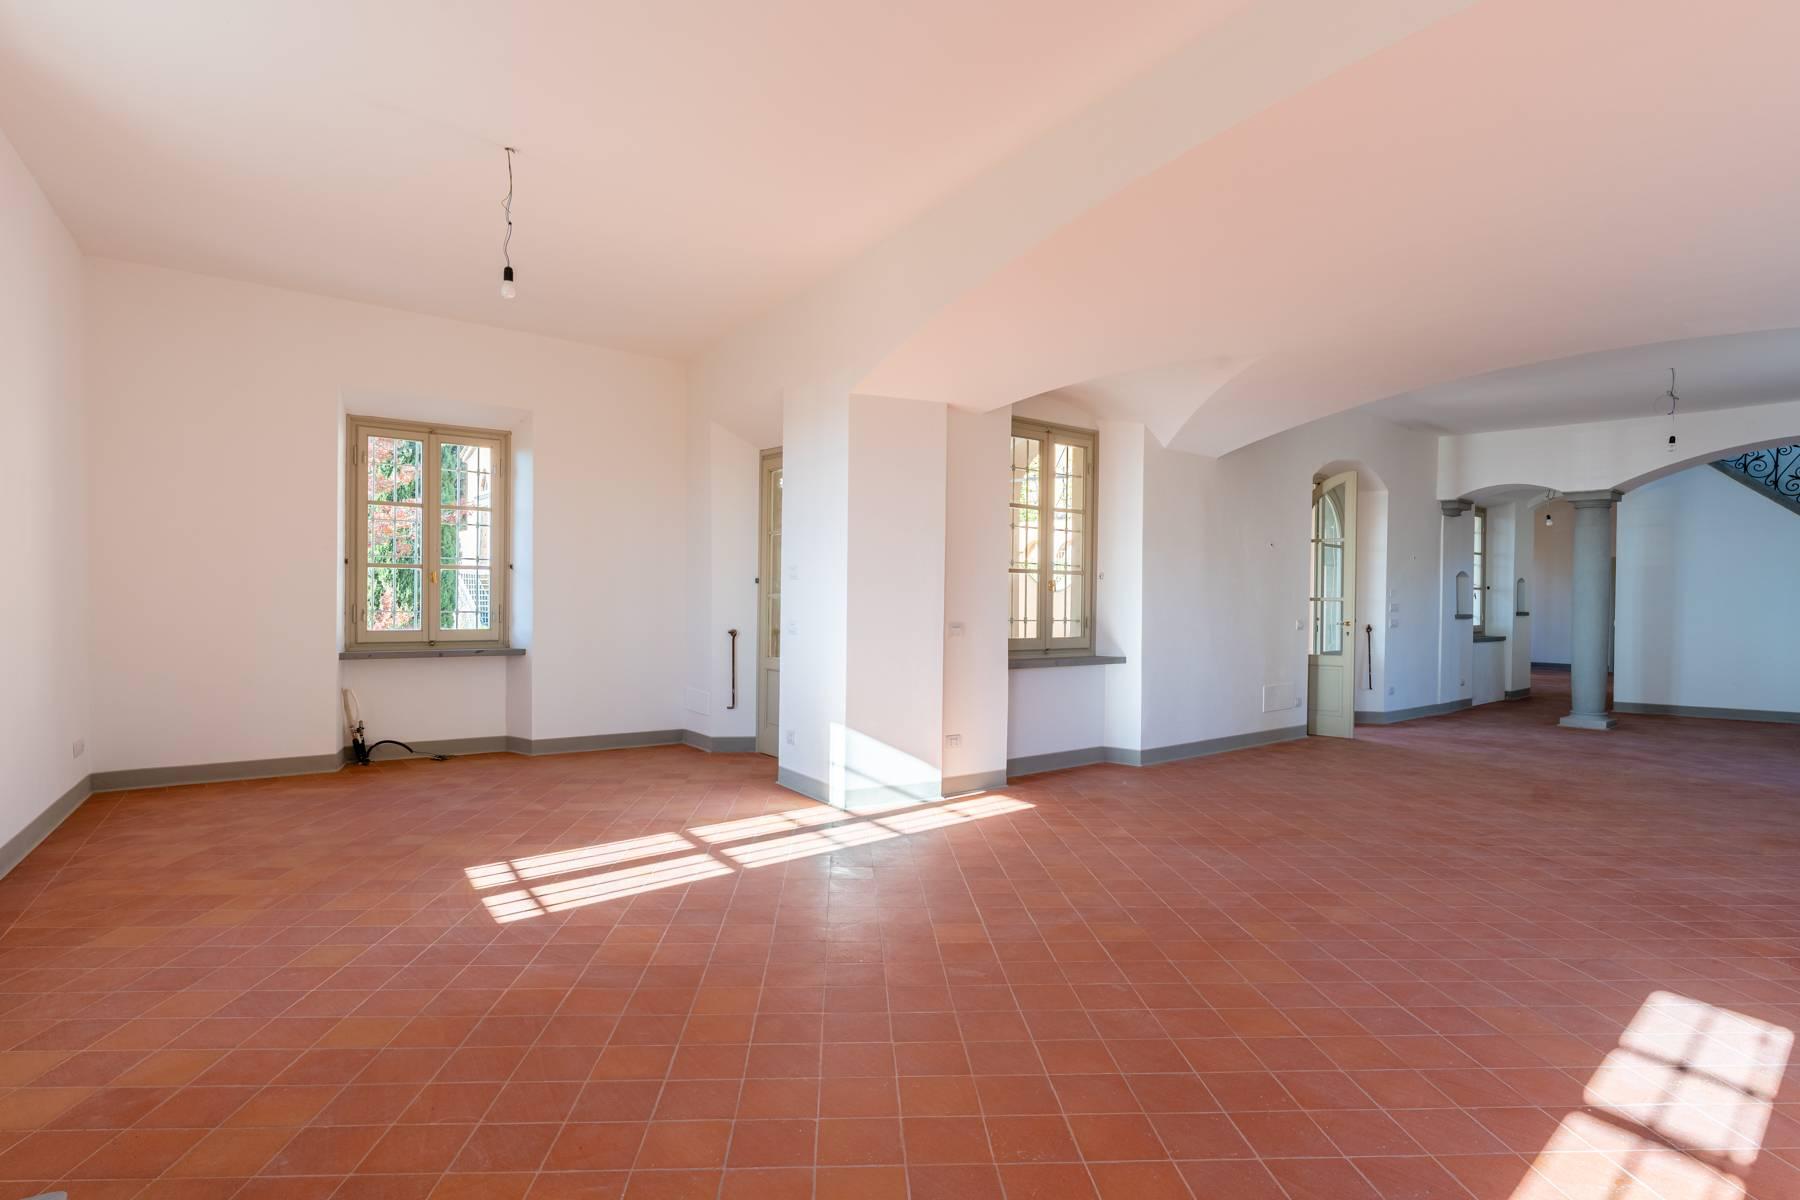 Historic Villa with Chapel on the hills of Pescia - 5